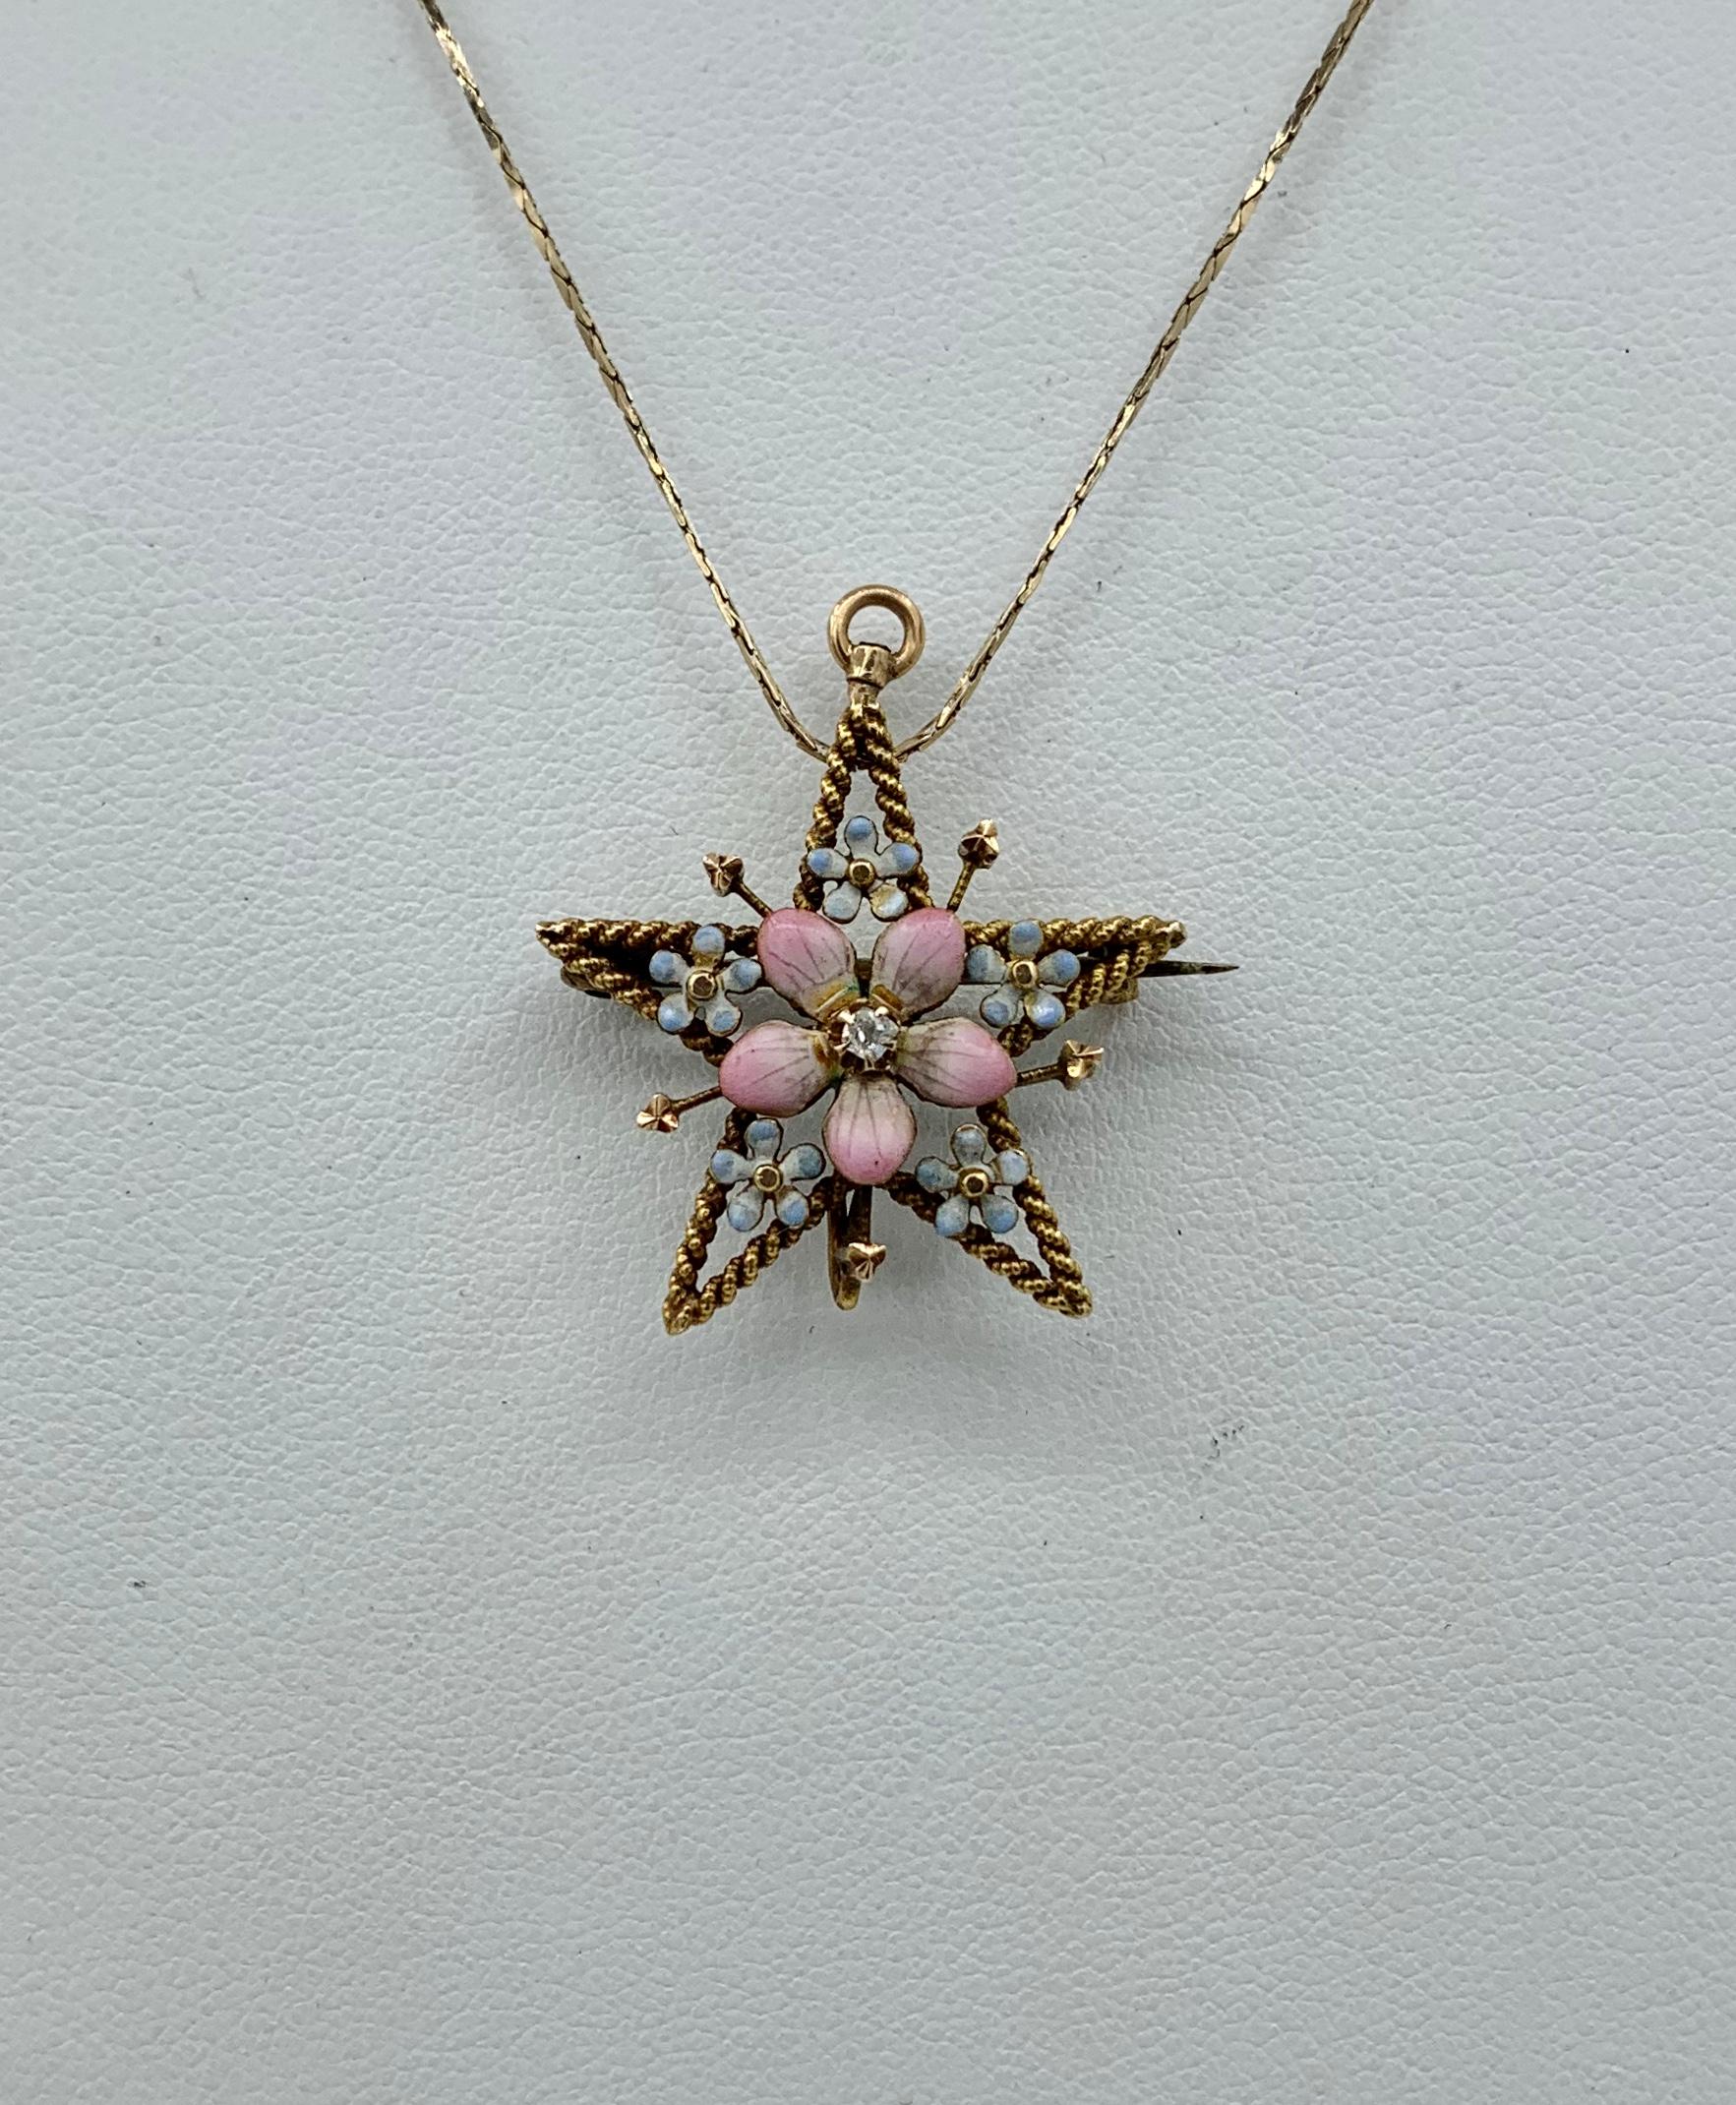 THIS IS A GORGEOUS VICTORIAN - ART NOUVEAU PENDANT WITH A BEAUTIFUL LAVENDER, CREAM AND BLUE ENAMEL FORGET-ME-NOT, OR PANSY FLOWER WITH AN OLD MINE CUT DIAMOND IN THE CENTER.  THE FLOWER IS SET IN AN ELEGANT GOLD RIBBON SURROUND WITH LOVELY ART